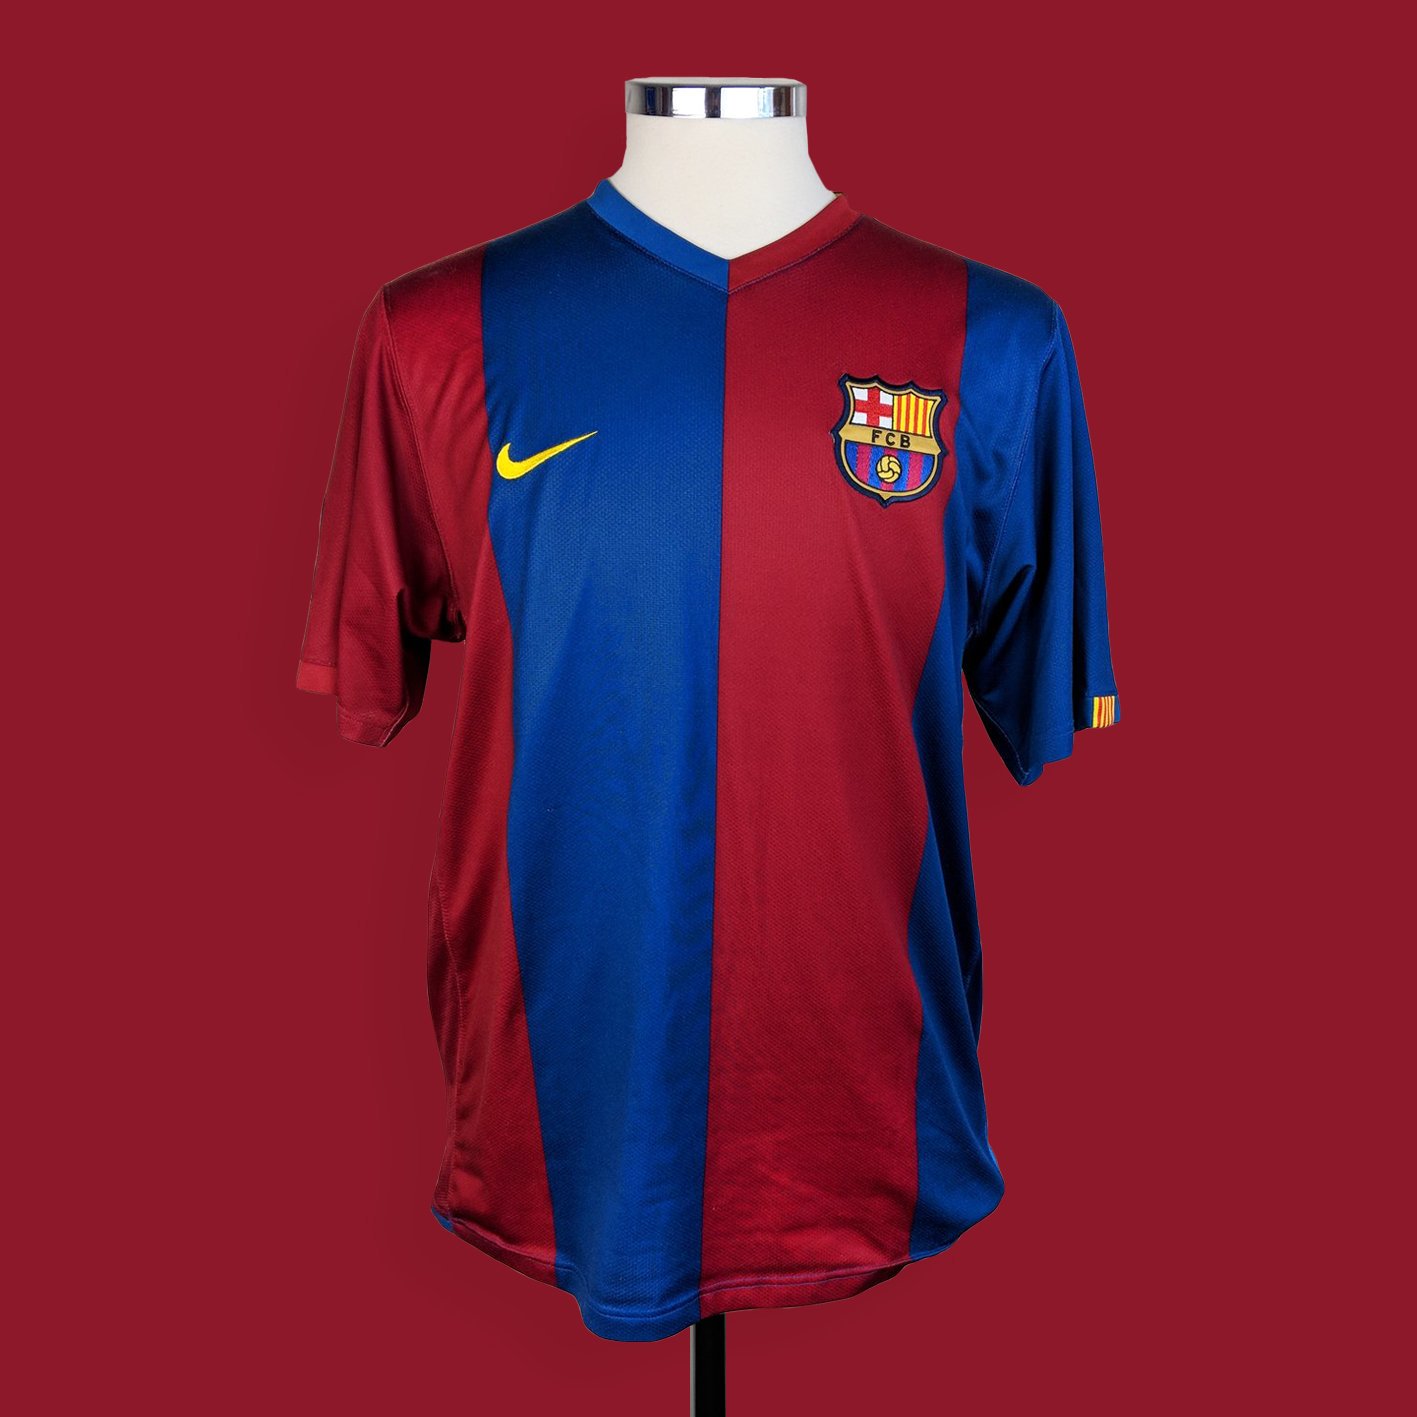 stad Kwaadaardige tumor kruipen Classic Football Shirts on Twitter: "On This Day in 2006 🗓️ Barcelona  agreed a deal to add Unicef to the shirts. This was the first sponsor to  appear on a Barcelona kit